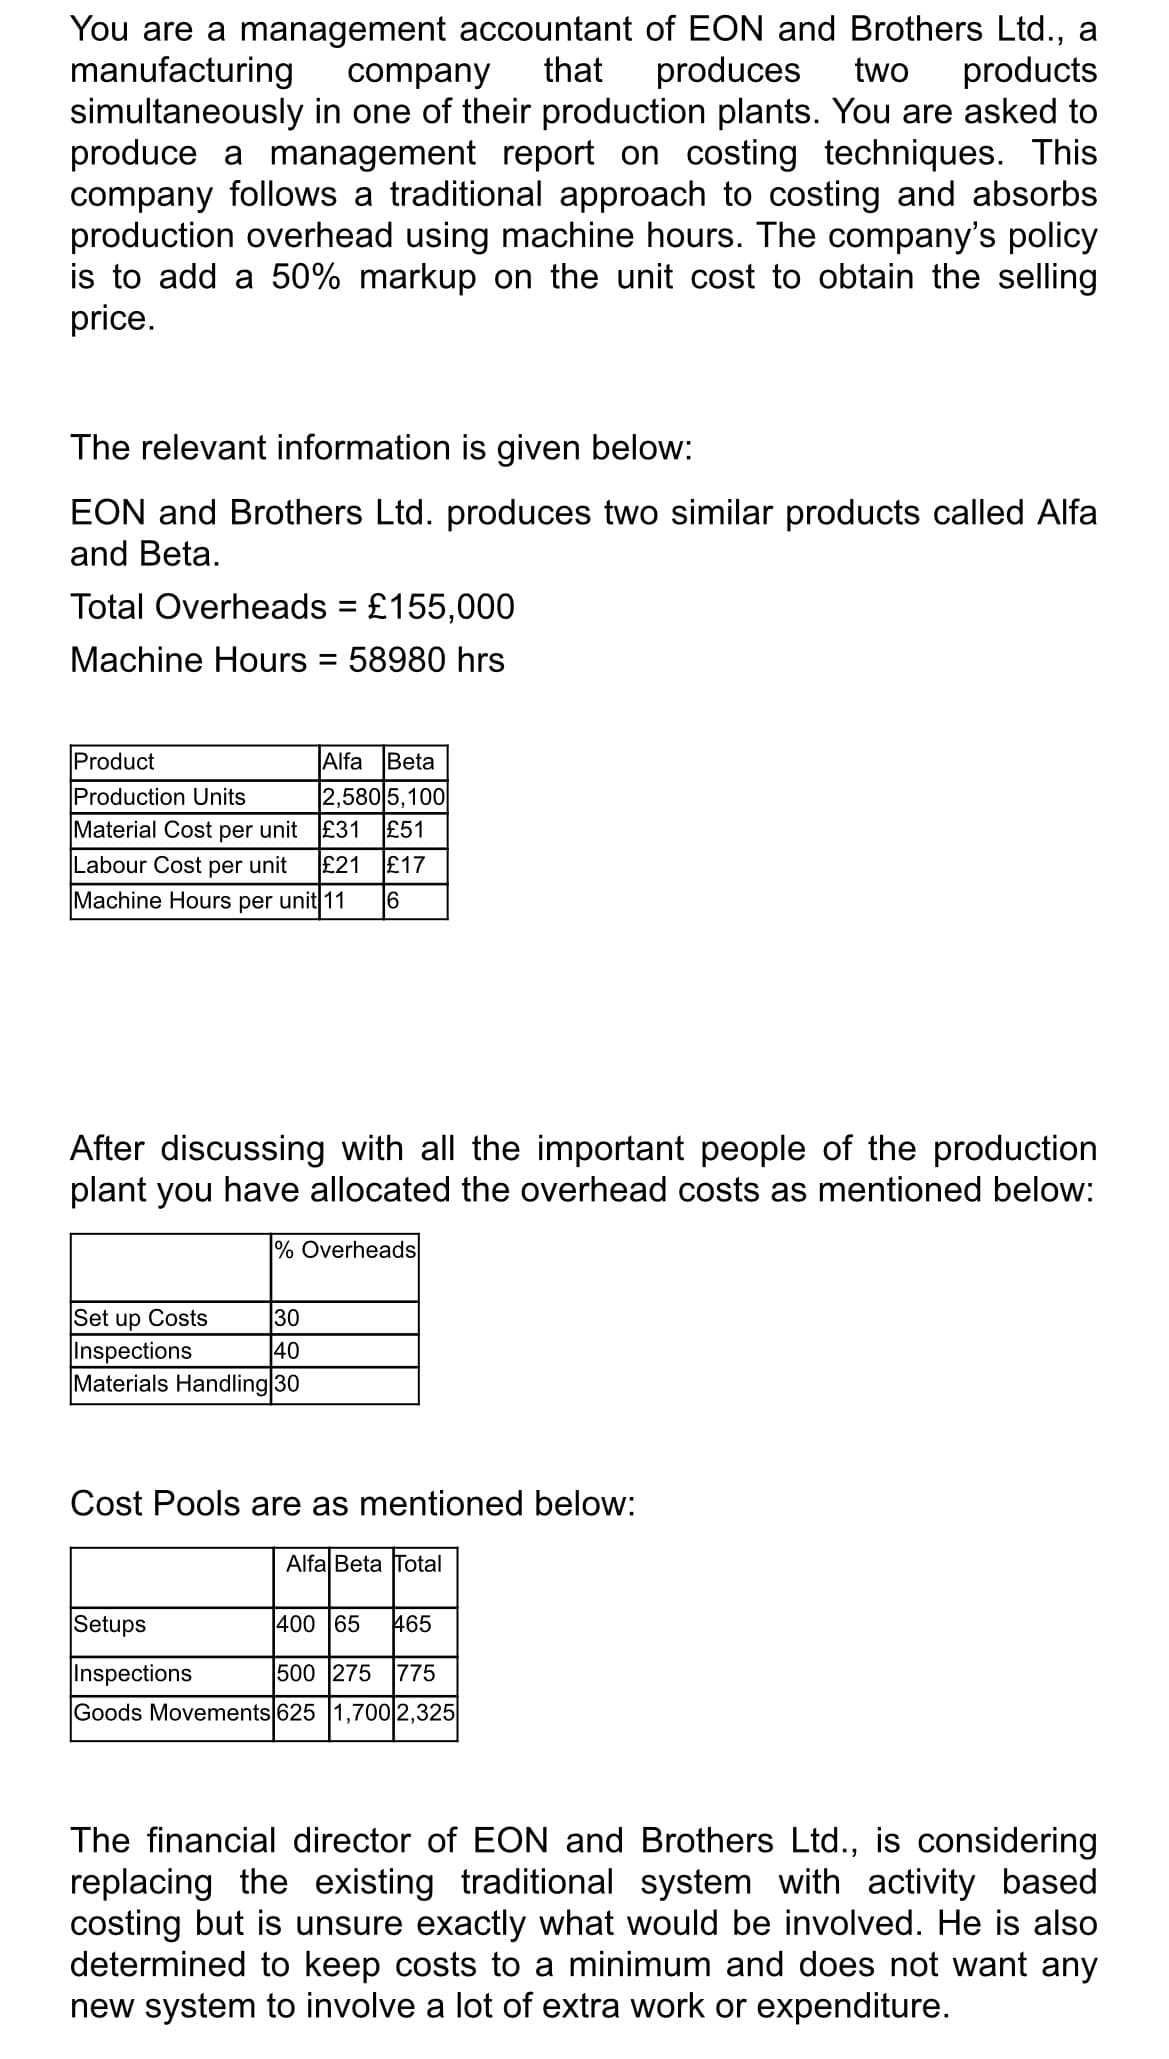 company
You are a management accountant of EON and Brothers Ltd., a
manufacturing
that produces two products
simultaneously in one of their production plants. You are asked to
produce a management report on costing techniques. This
company follows a traditional approach to costing and absorbs
production overhead using machine hours. The company's policy
is to add a 50% markup on the unit cost to obtain the selling
price.
The relevant information is given below:
EON and Brothers Ltd. produces two similar products called Alfa
and Beta.
Total Overheads = £155,000
Machine Hours = 58980 hrs
Product
Alfa Beta
Production Units
2,580 5,100
Material Cost per unit £31 £51
Labour Cost per unit £21 £17
Machine Hours per unit 11 16
After discussing with all the important people of the production
plant you have allocated the overhead costs as mentioned below:
% Overheads
Set up Costs
30
Inspections
40
Materials Handling 30
Cost Pools are as mentioned below:
Alfa Beta Total
Setups
400 65 465
Inspections
500 275 775
Goods Movements 625 1,700 2,325
The financial director of EON and Brothers Ltd., is considering
replacing the existing traditional system with activity based
costing but is unsure exactly what would be involved. He is also
determined to keep costs to a minimum and does not want any
new system to involve a lot of extra work or expenditure.